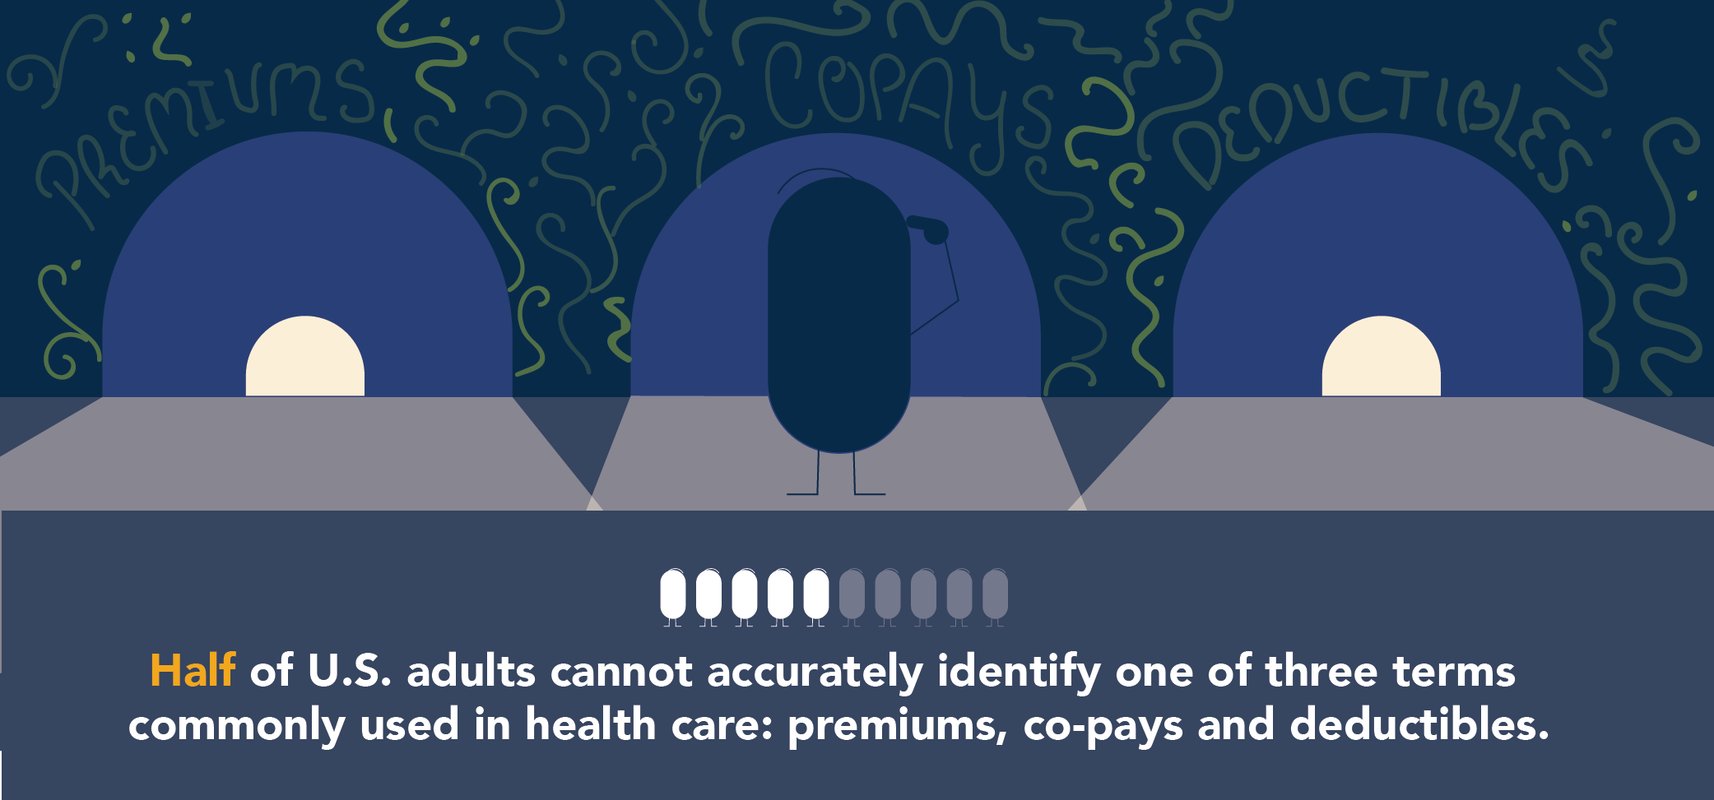 Half of U.S. adults cannot accurately identify one of three terms commonly used in health care: premiums, co-pays and deductibles.